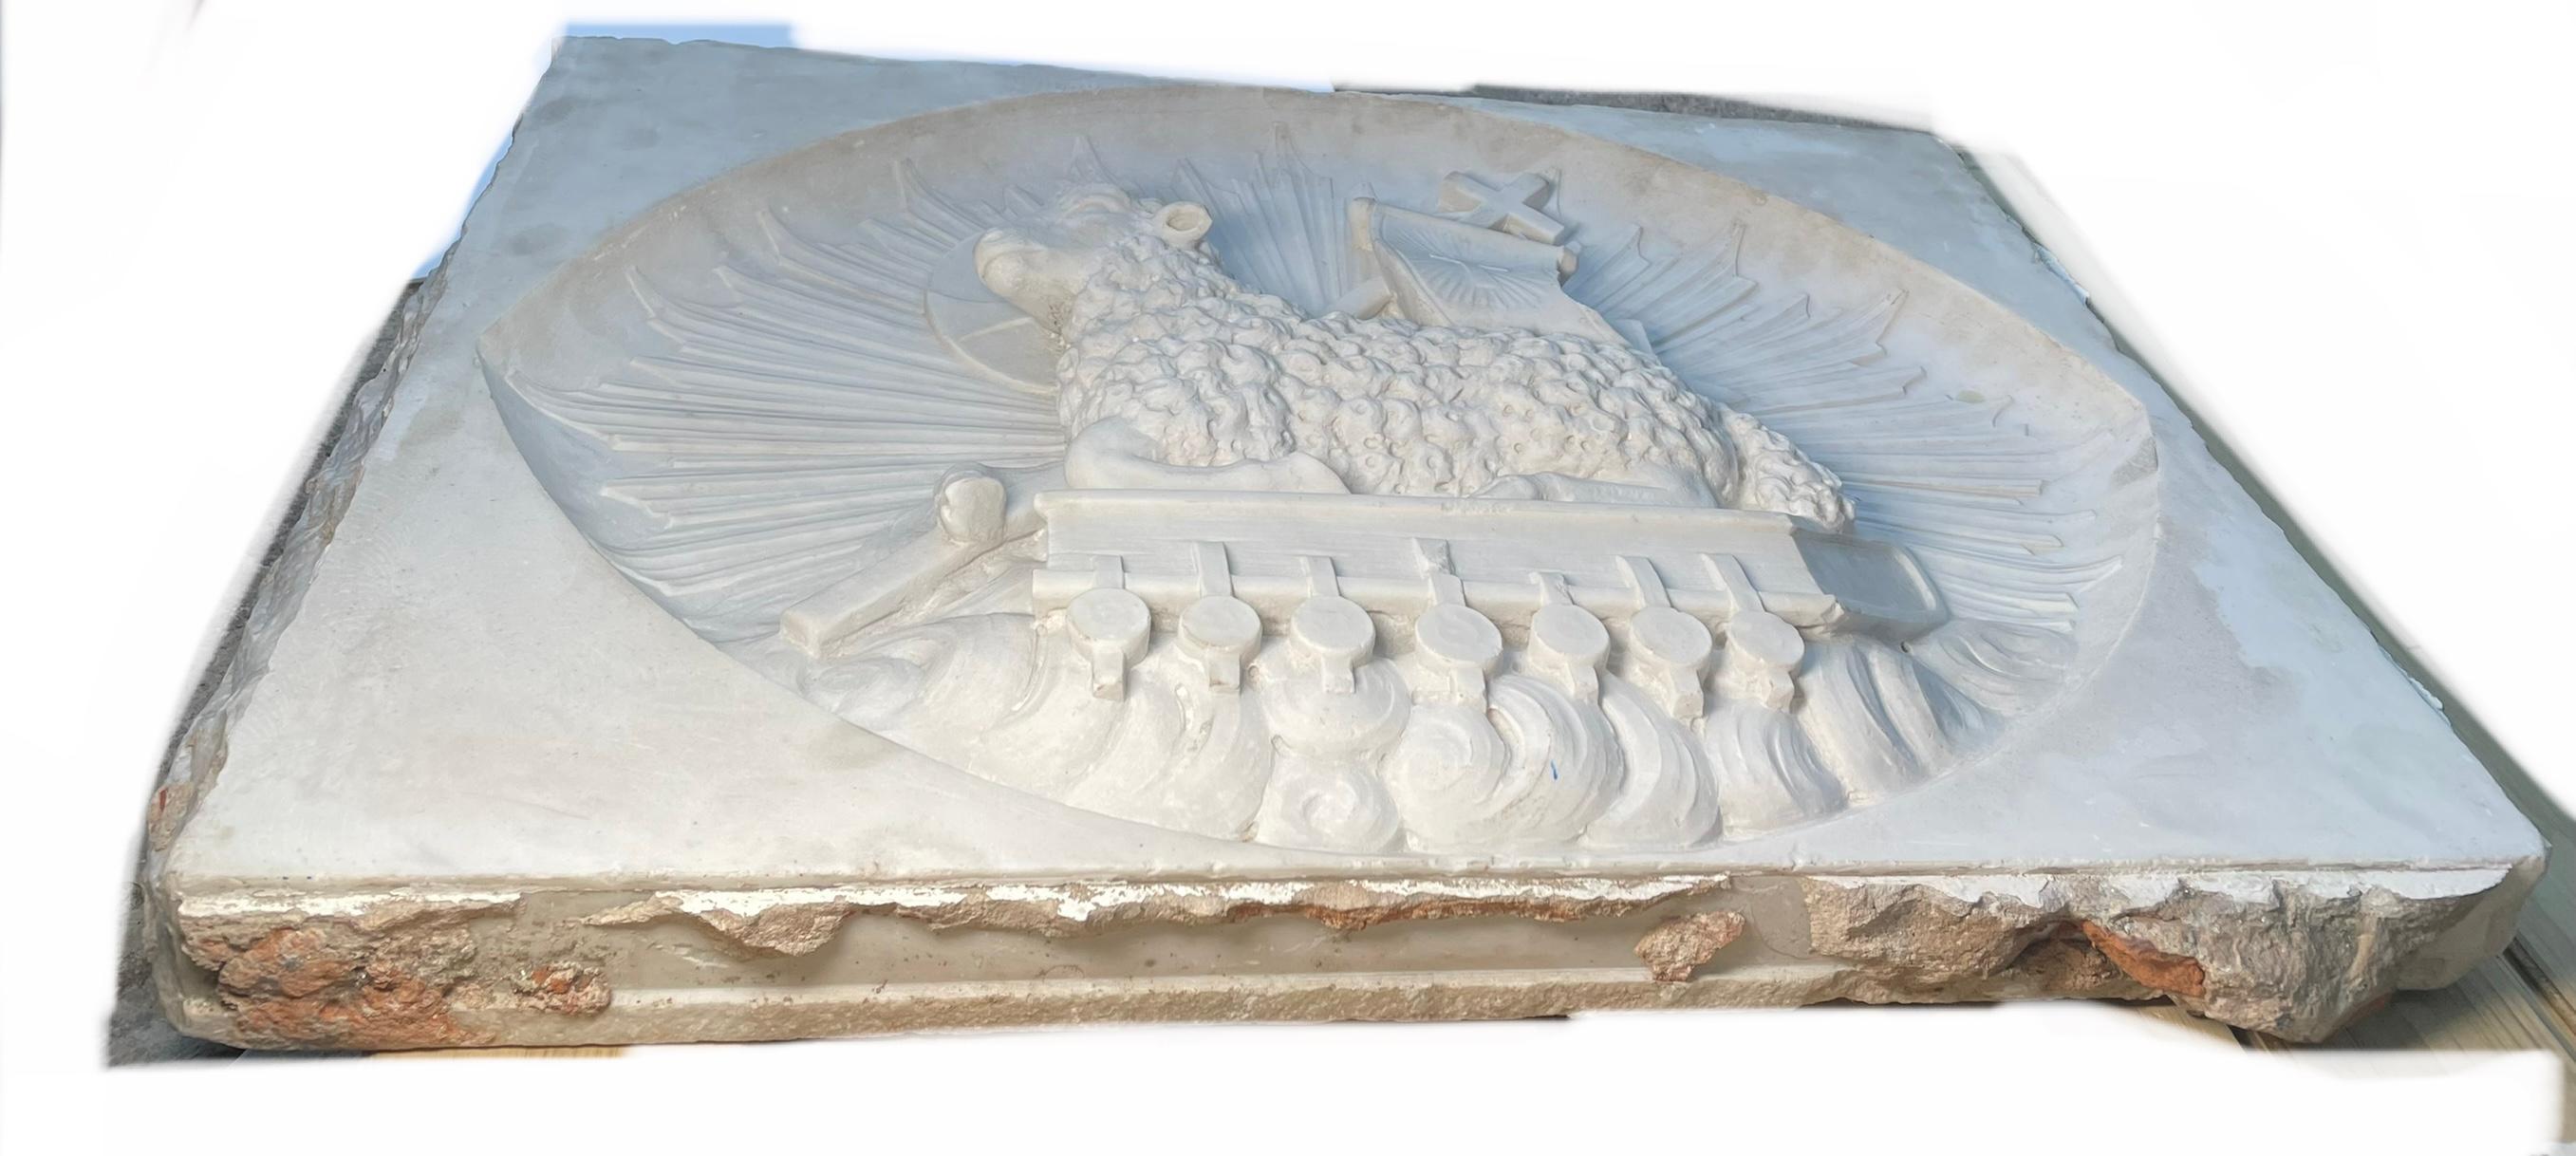 This is a large heavy rectangular shaped carved marble relief of the Agnus Dei. It depicts a lamb with curly hair seated over a Bible and bearing a cross. This one also has a banner with an engraved cross. A halo with a cross is around the lamb